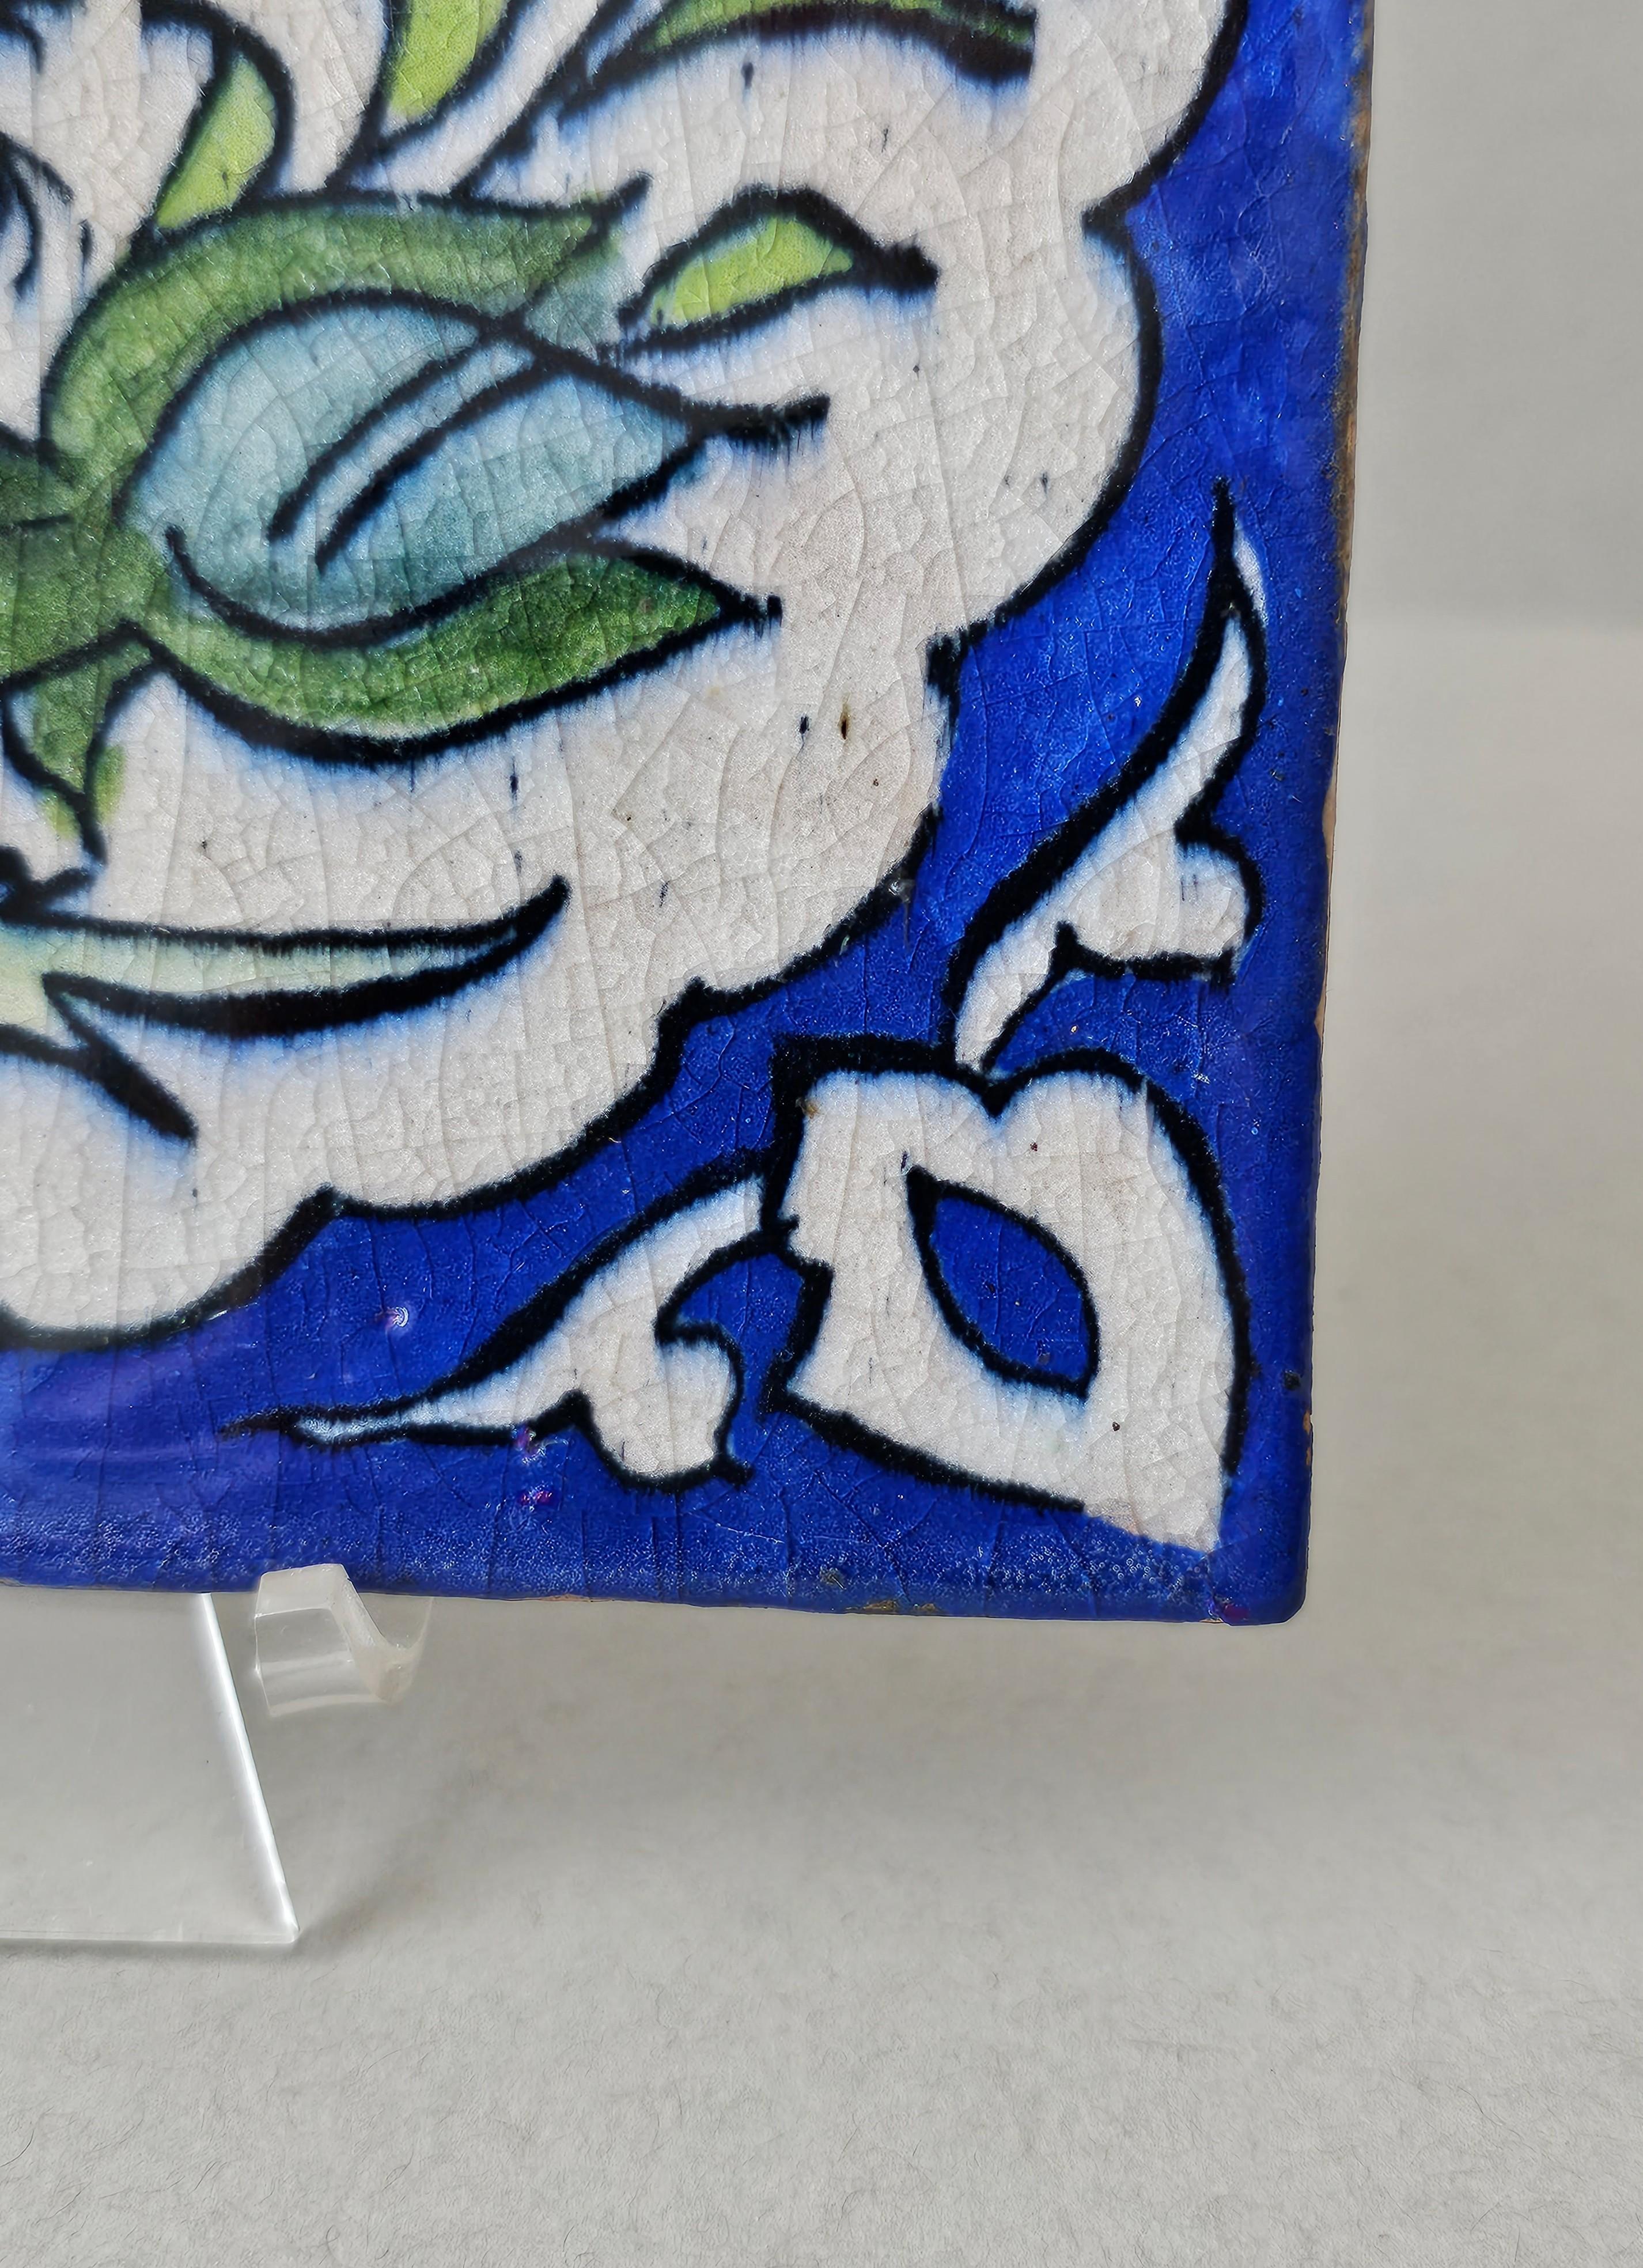 19th Century Persian Hand Painted Ceramic Wall Tile  For Sale 6